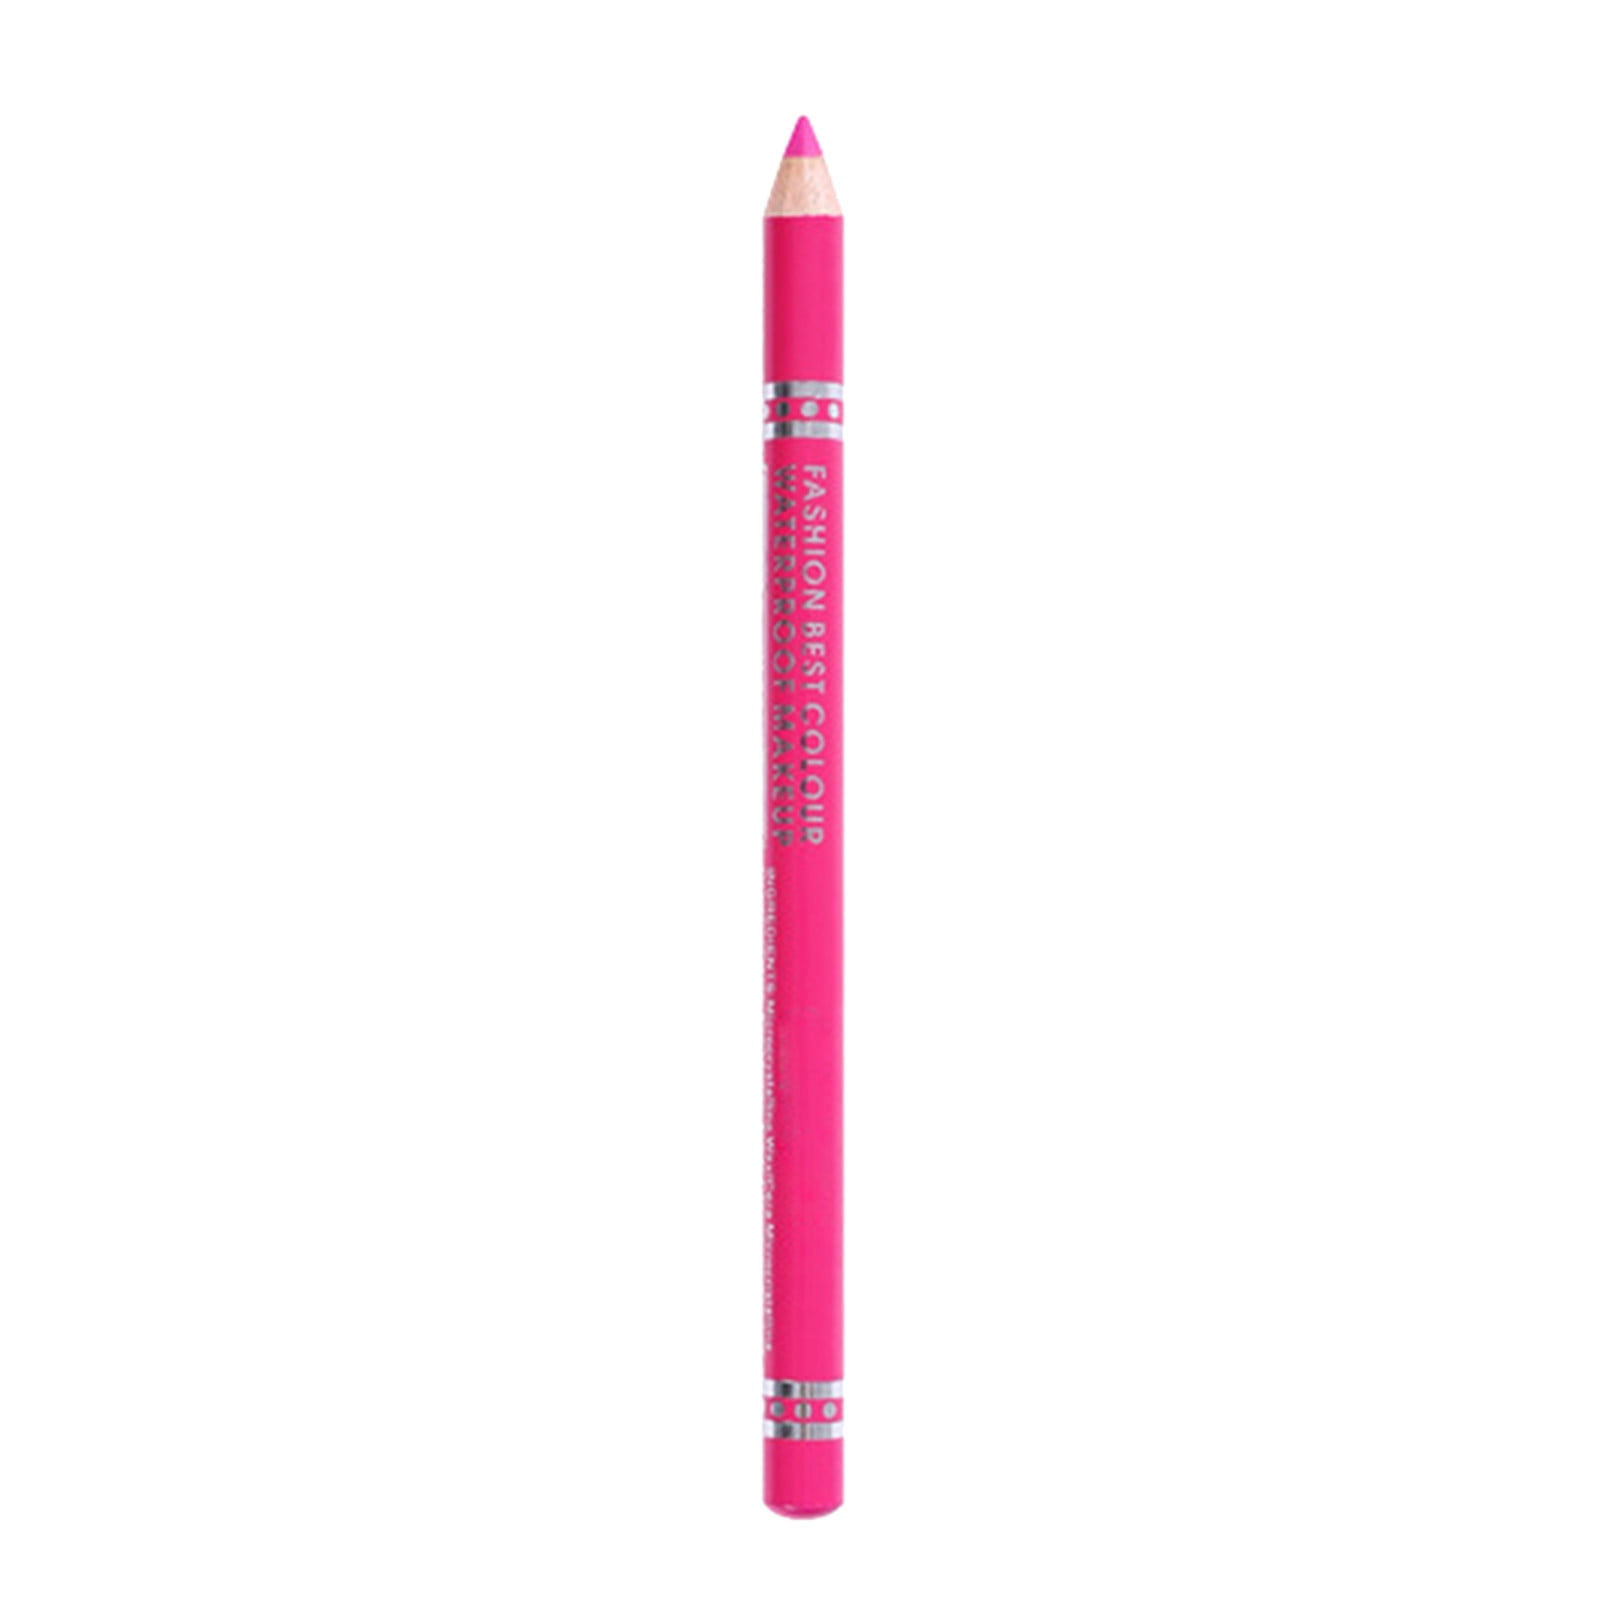  Miaowater Clear Acrylic Makeup Eyeliner Lip Liner